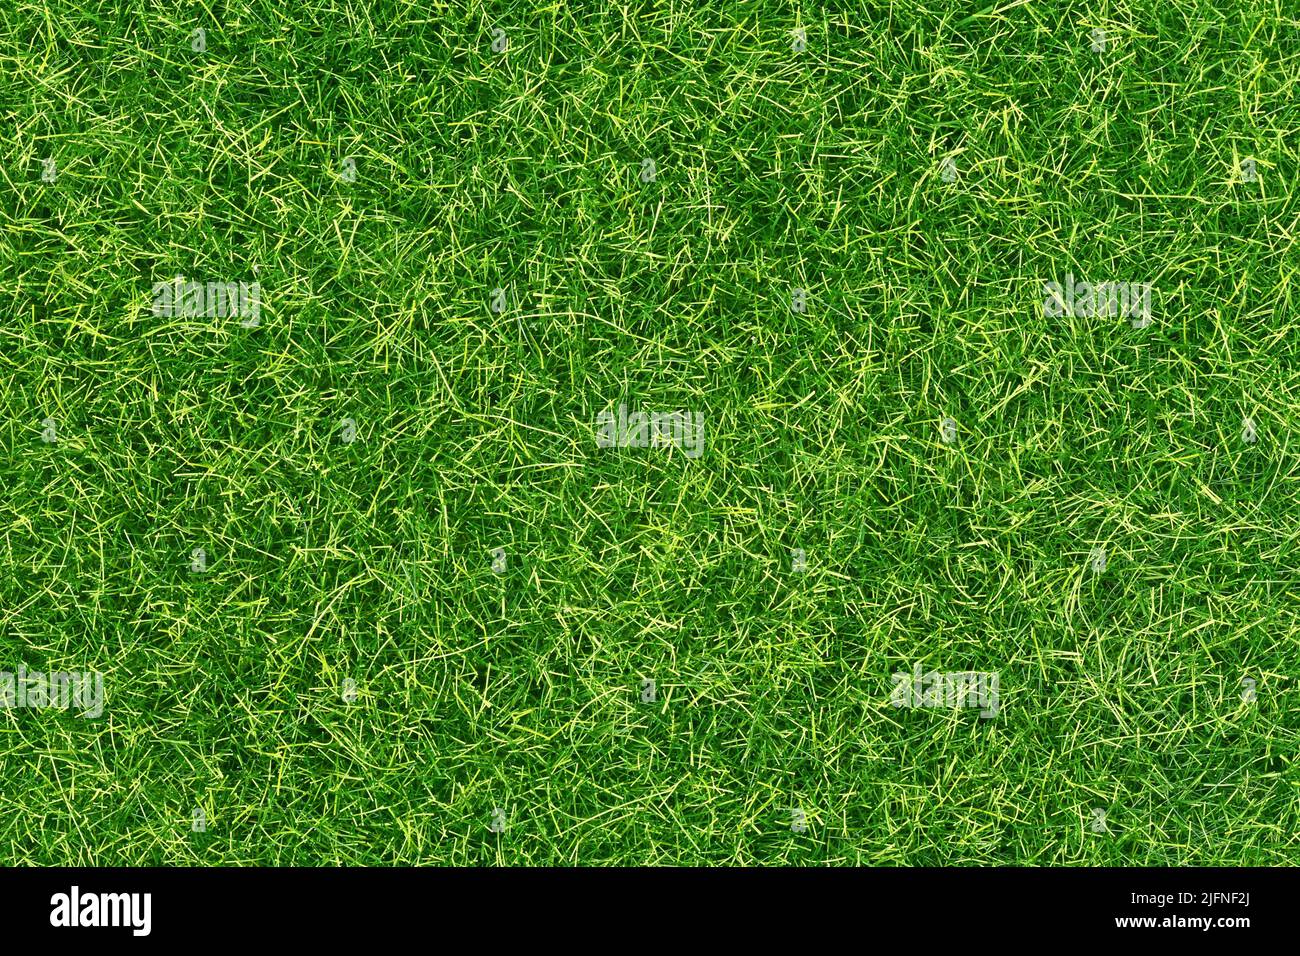 Top view of synthetic turf grass Stock Photo